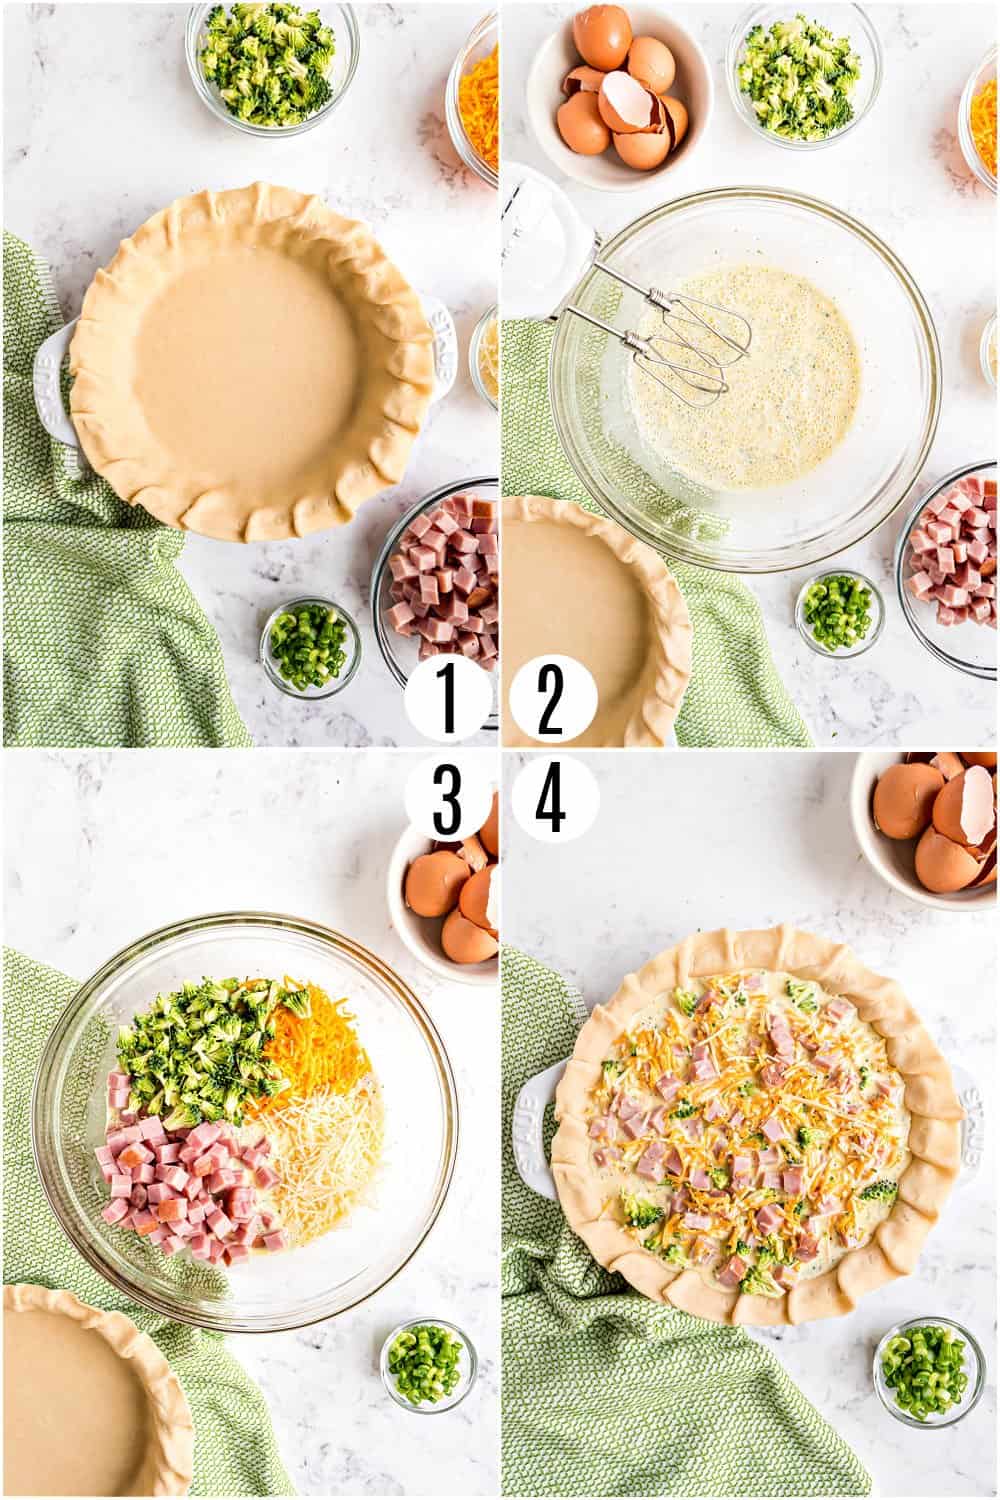 Step by step photos showing how to make ham and cheese quiche.